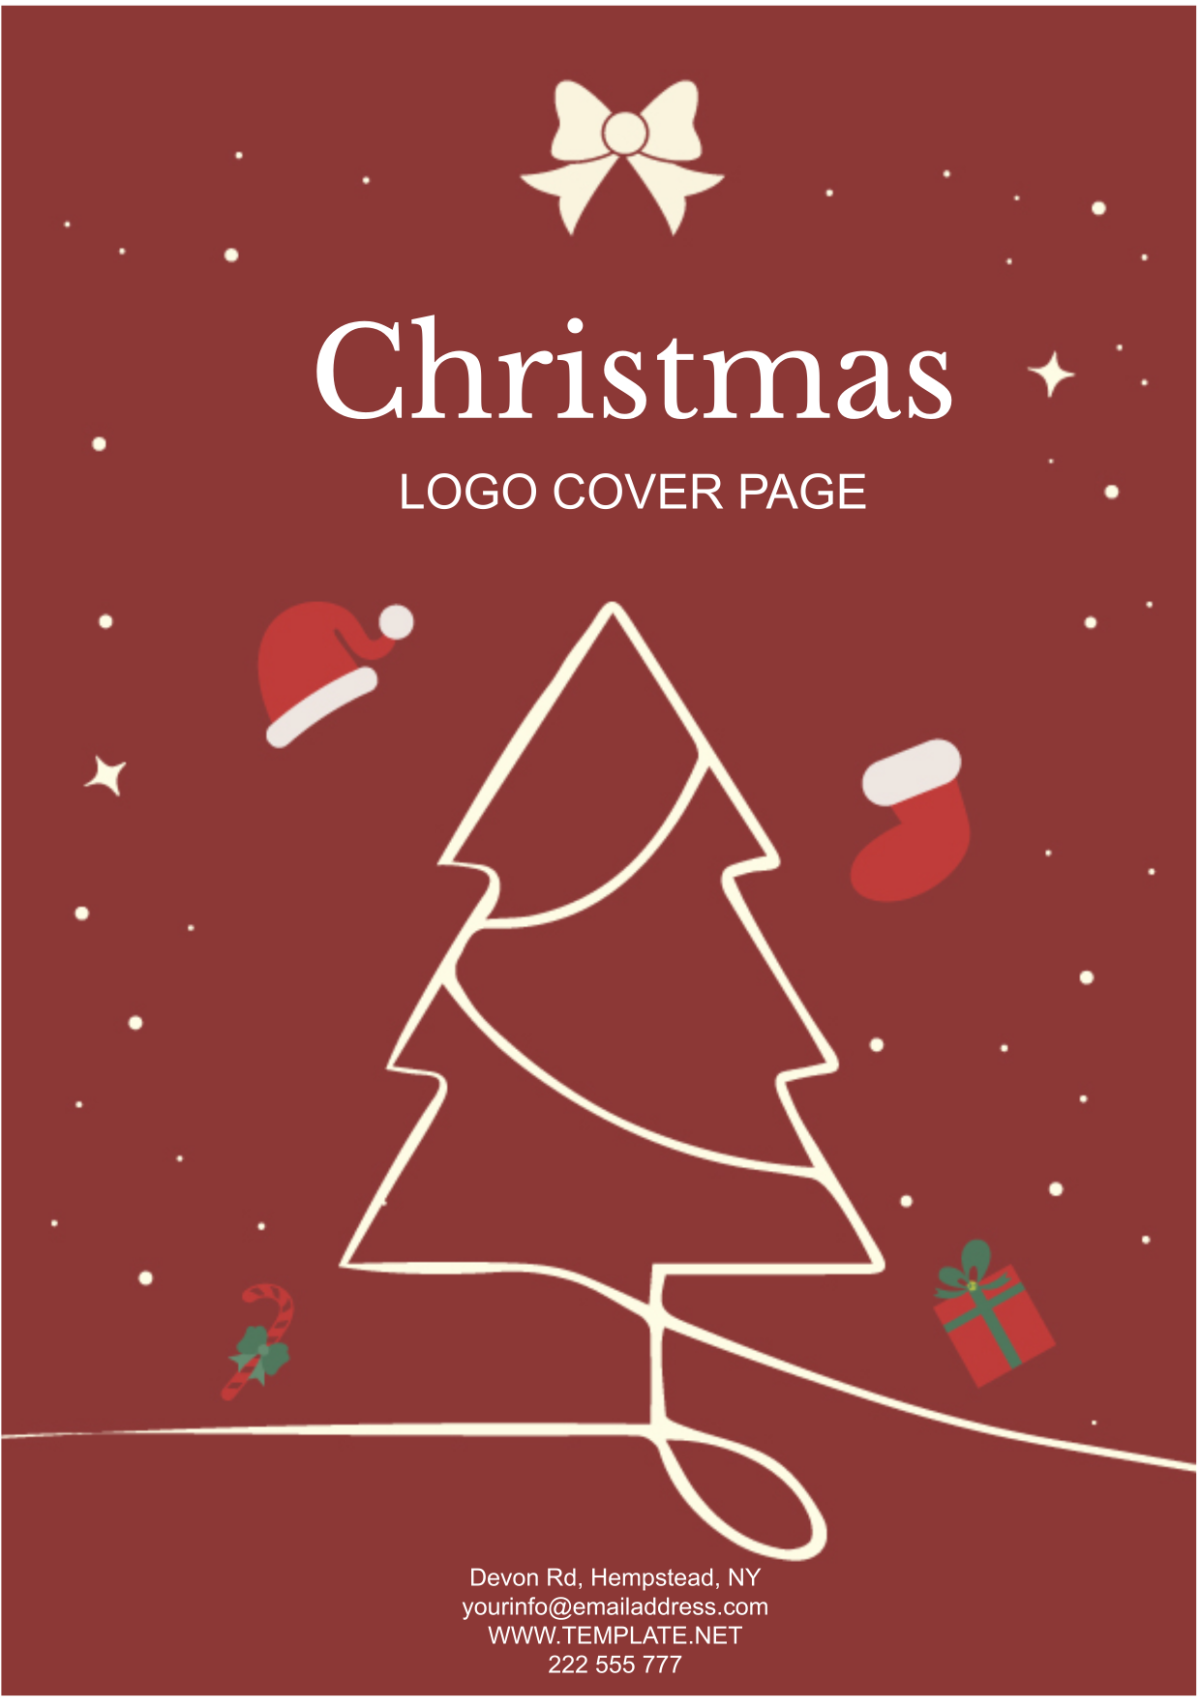 Christmas Cover Page